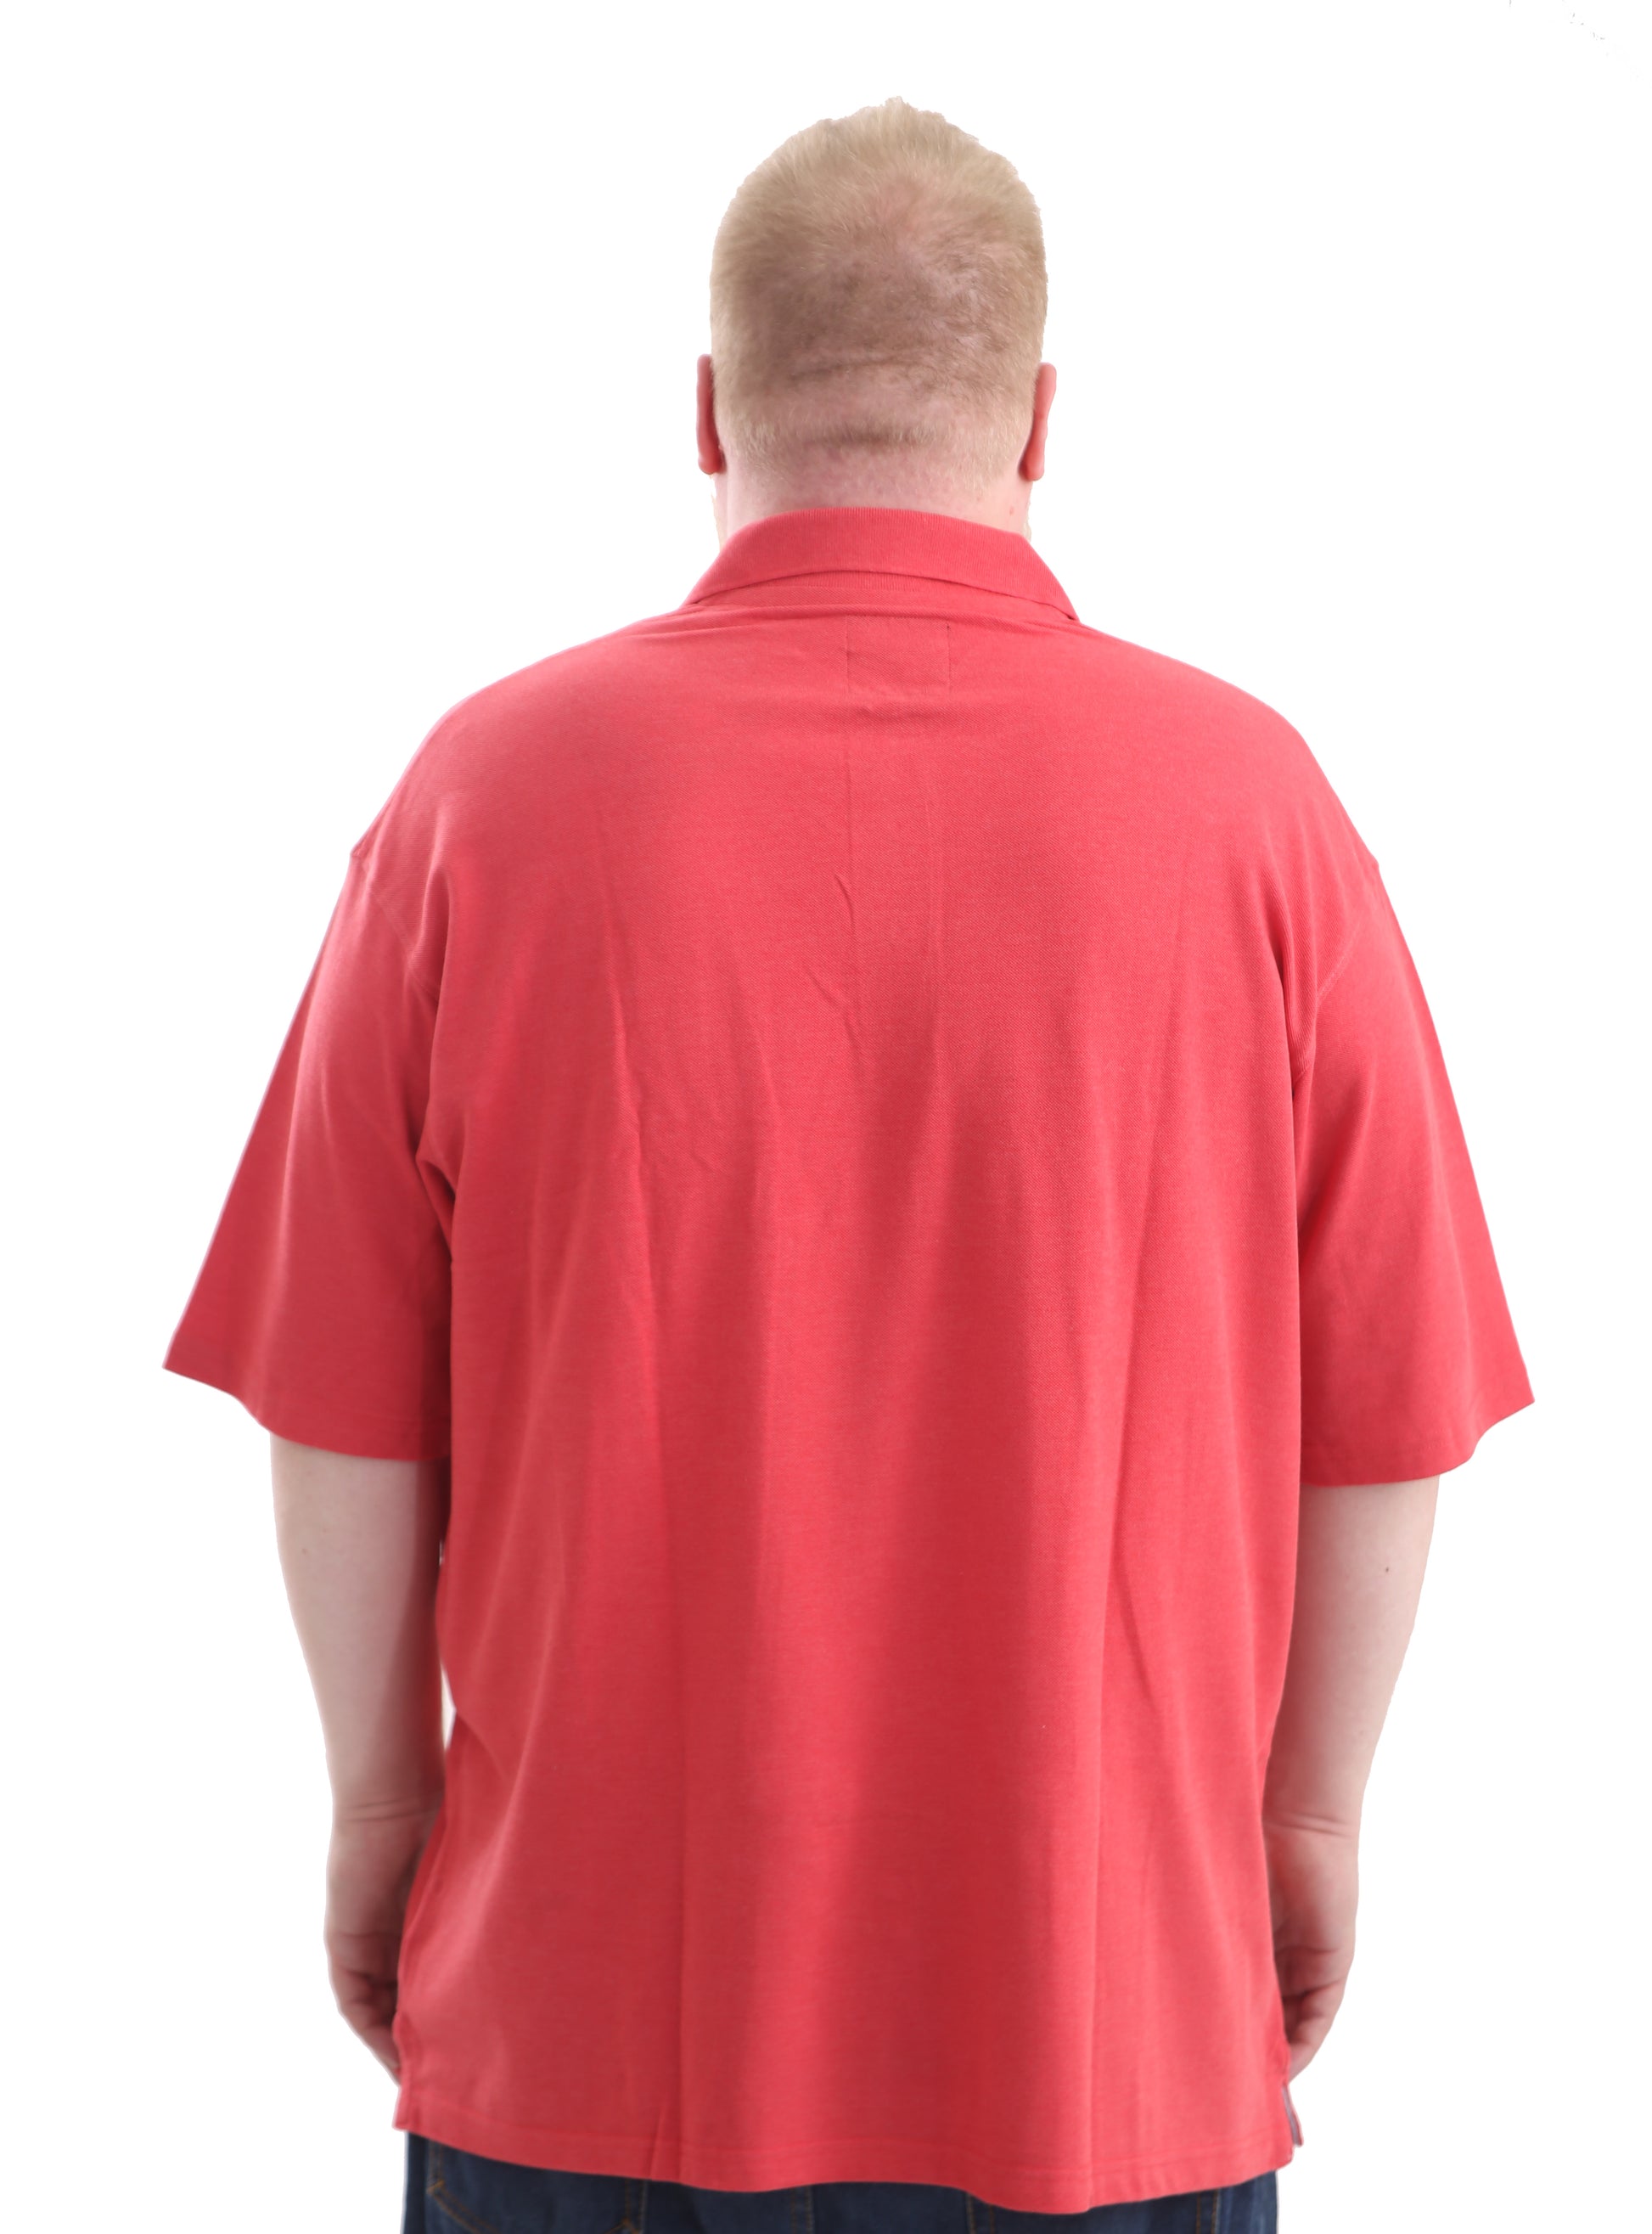 Mens Big Size Polo Shirt In Red - Brooklyn Direct UK